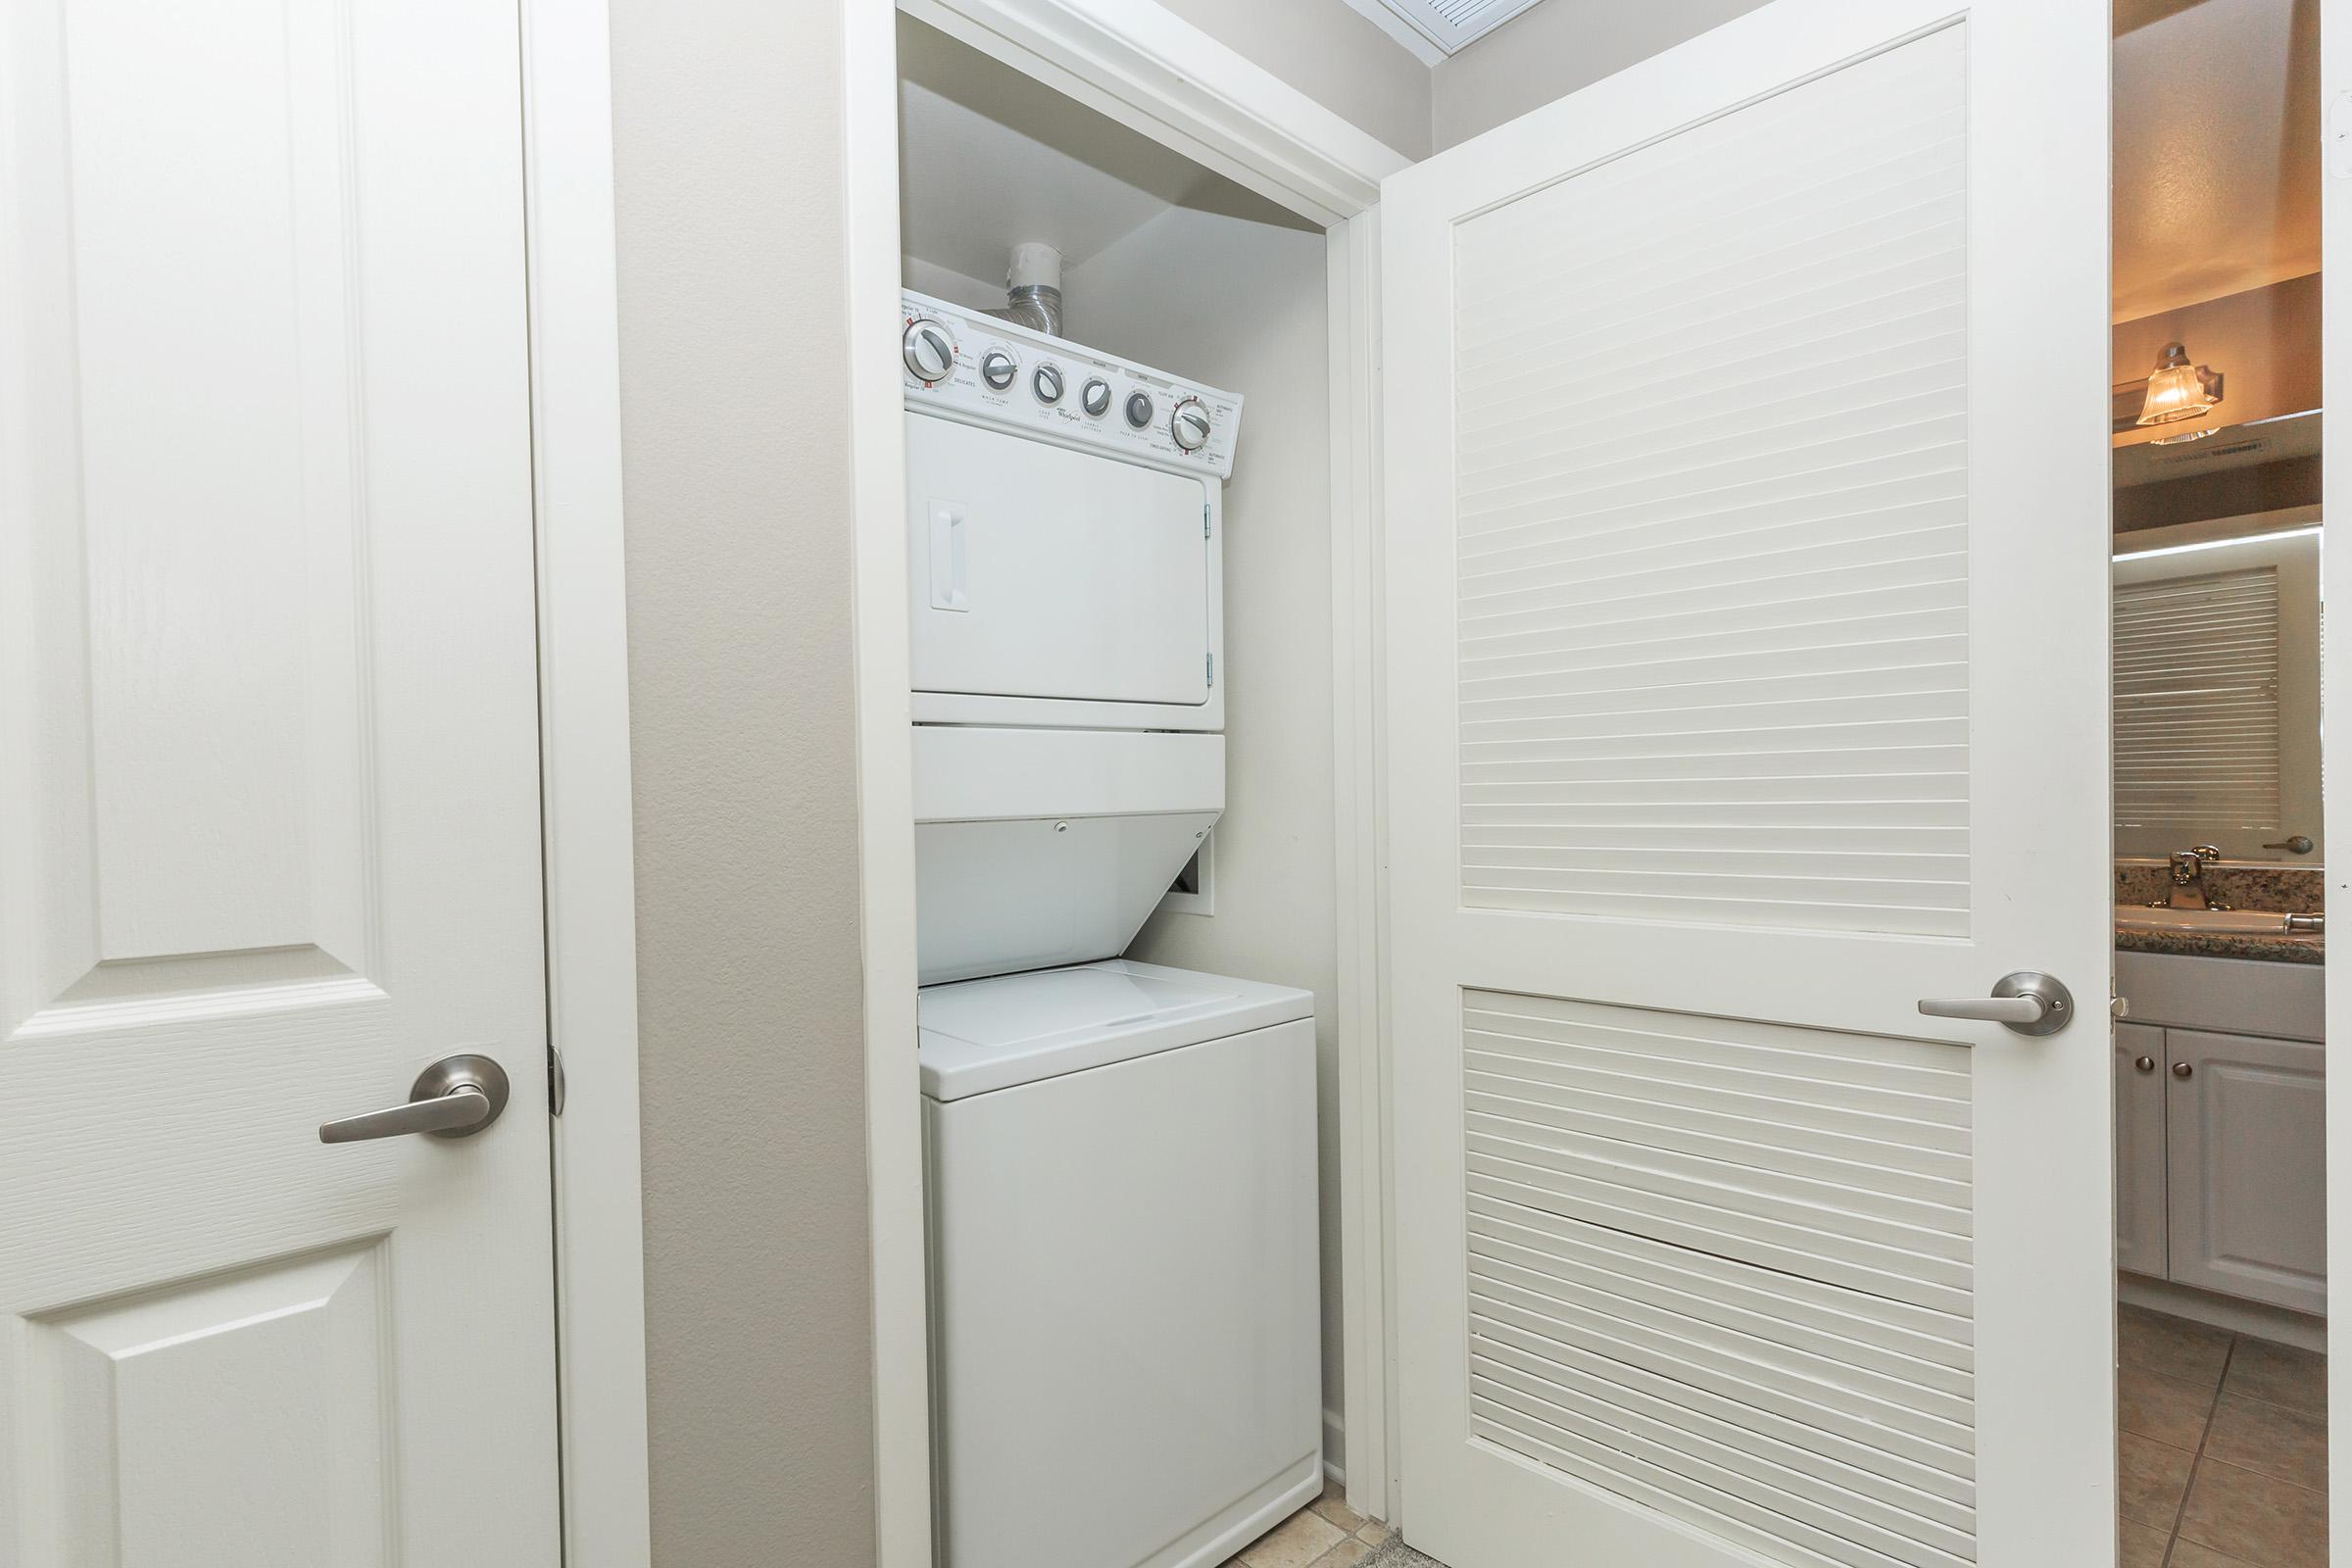 Stacked washer and dryer in closet